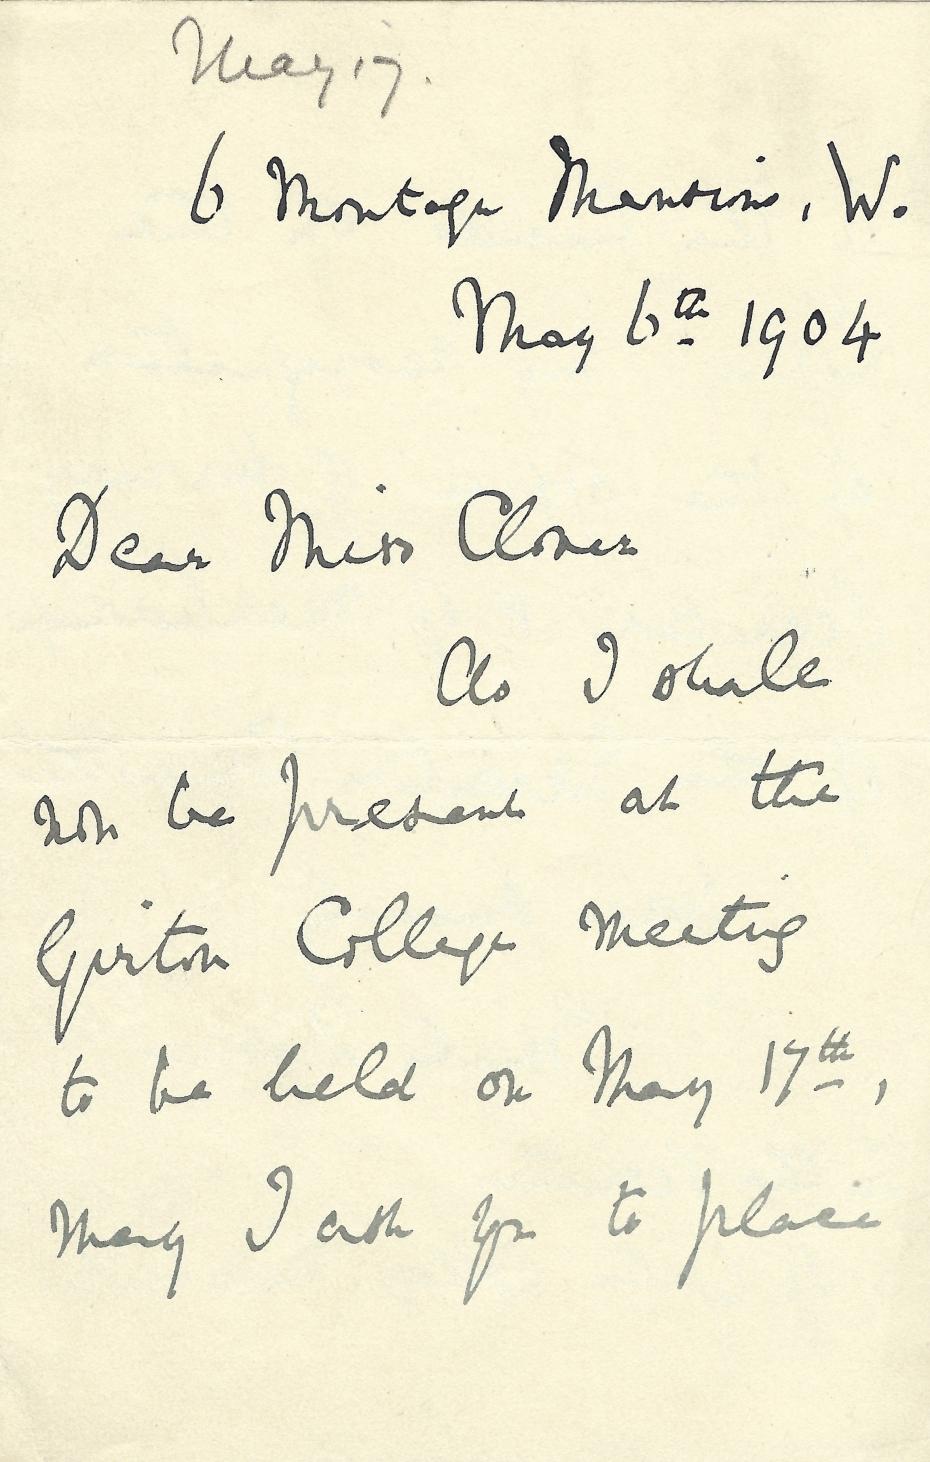 Emily’s letter of resignation addressed to Mary Clover, the Secretary of the College, 6 May 1904 (archive reference: GCAR 2/5/6/1/1pt).